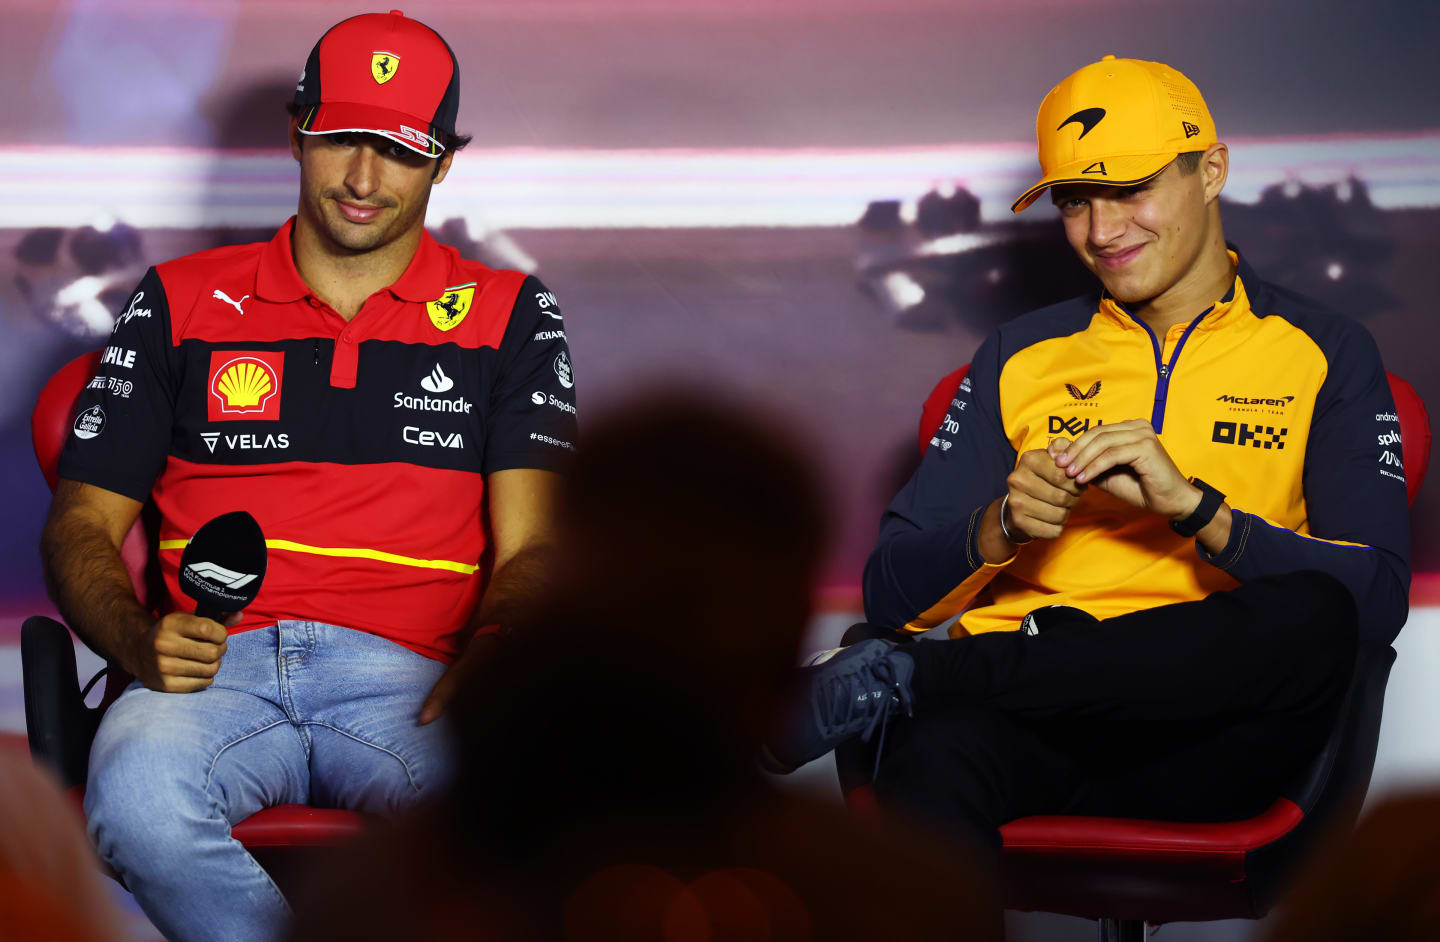 ZANDVOORT, NETHERLANDS - SEPTEMBER 01: Carlos Sainz of Spain and Ferrari and Lando Norris of Great Britain and McLaren attend the Drivers Press Conference during previews ahead of the F1 Grand Prix of The Netherlands at Circuit Zandvoort on September 01, 2022 in Zandvoort, Netherlands. (Photo by Lars Baron/Getty Images)